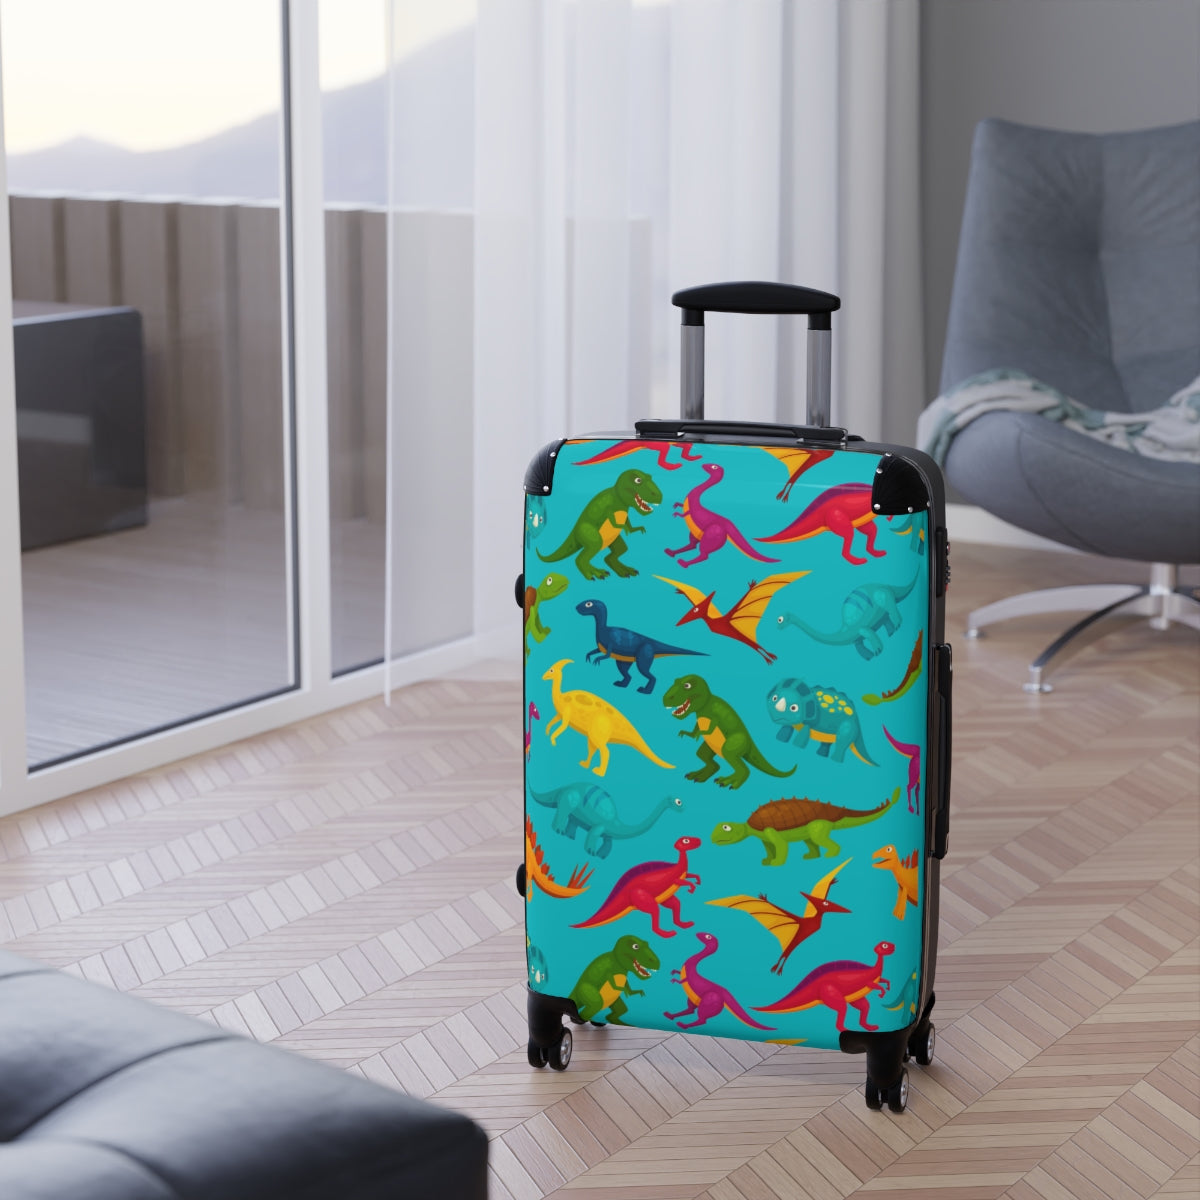 KIDS CARRY-ON Suitcases, Dinosaur Boys Cabin Suitcases, Kids Luggage With Wheels, Spinner, Combination Lock | Artzira